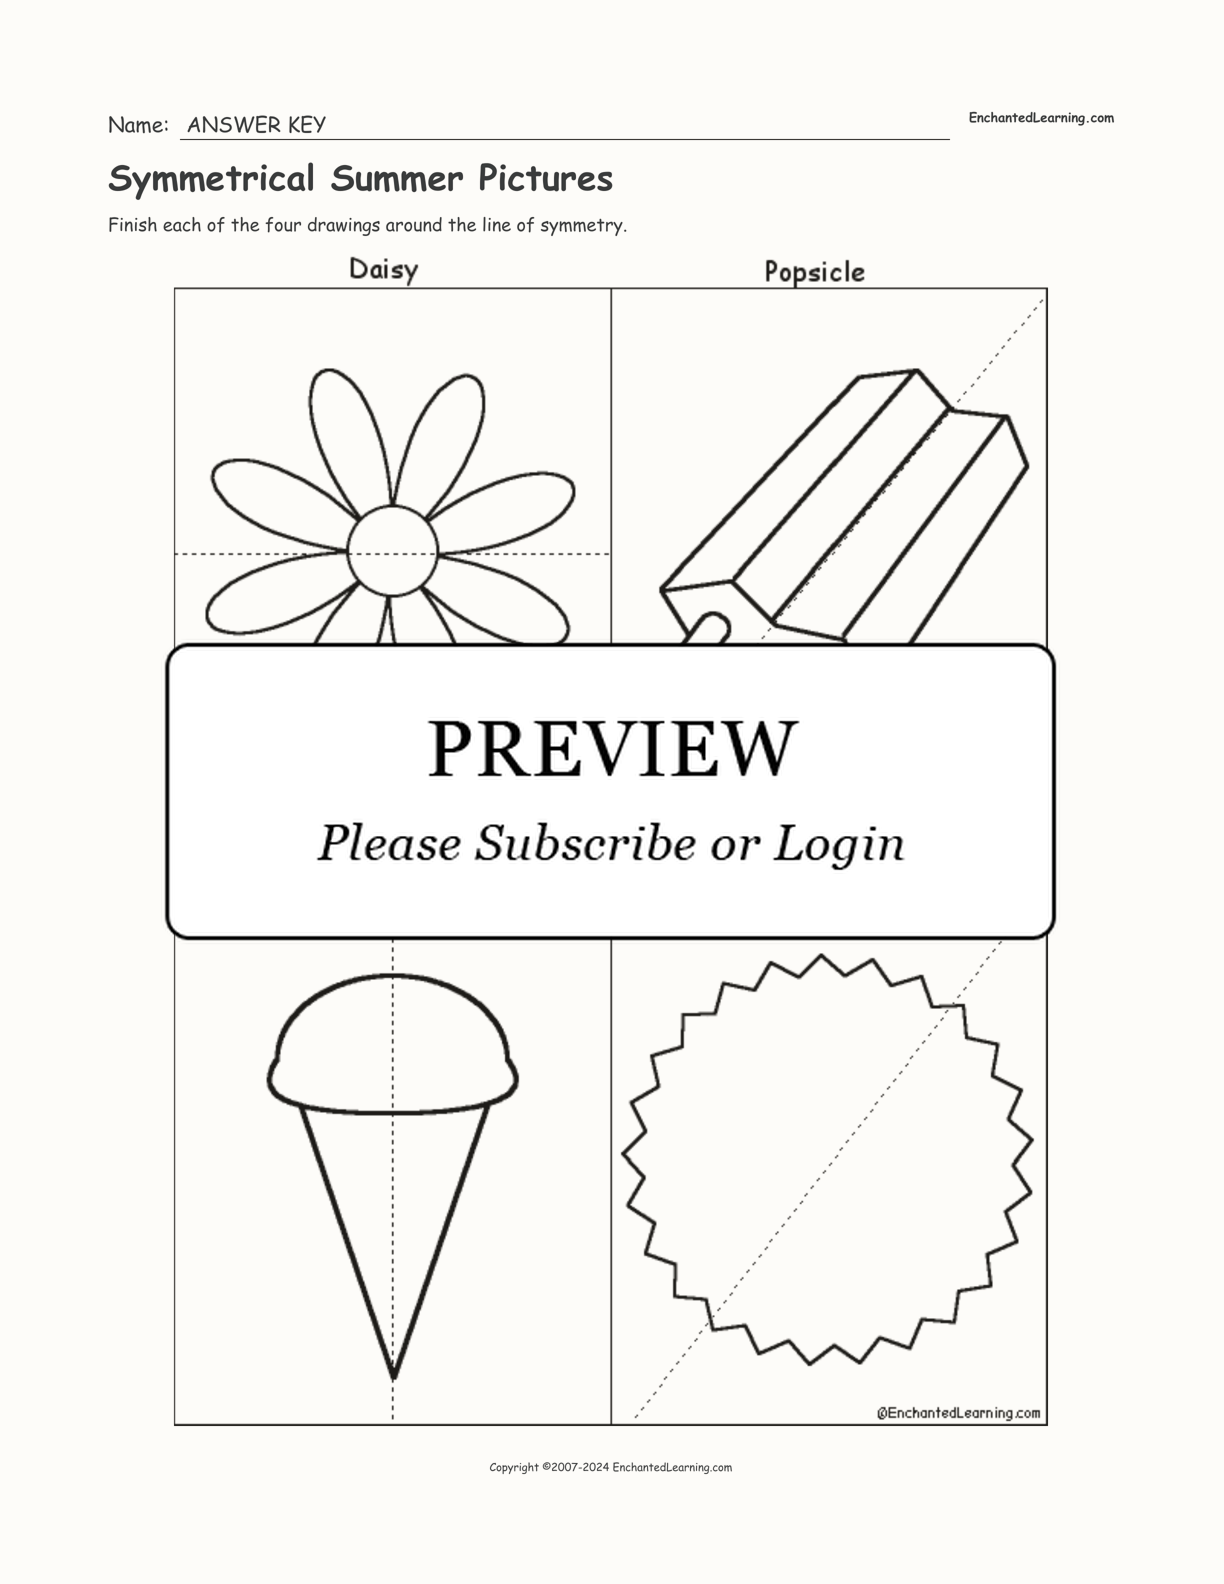 Symmetrical Summer Pictures interactive worksheet page 2